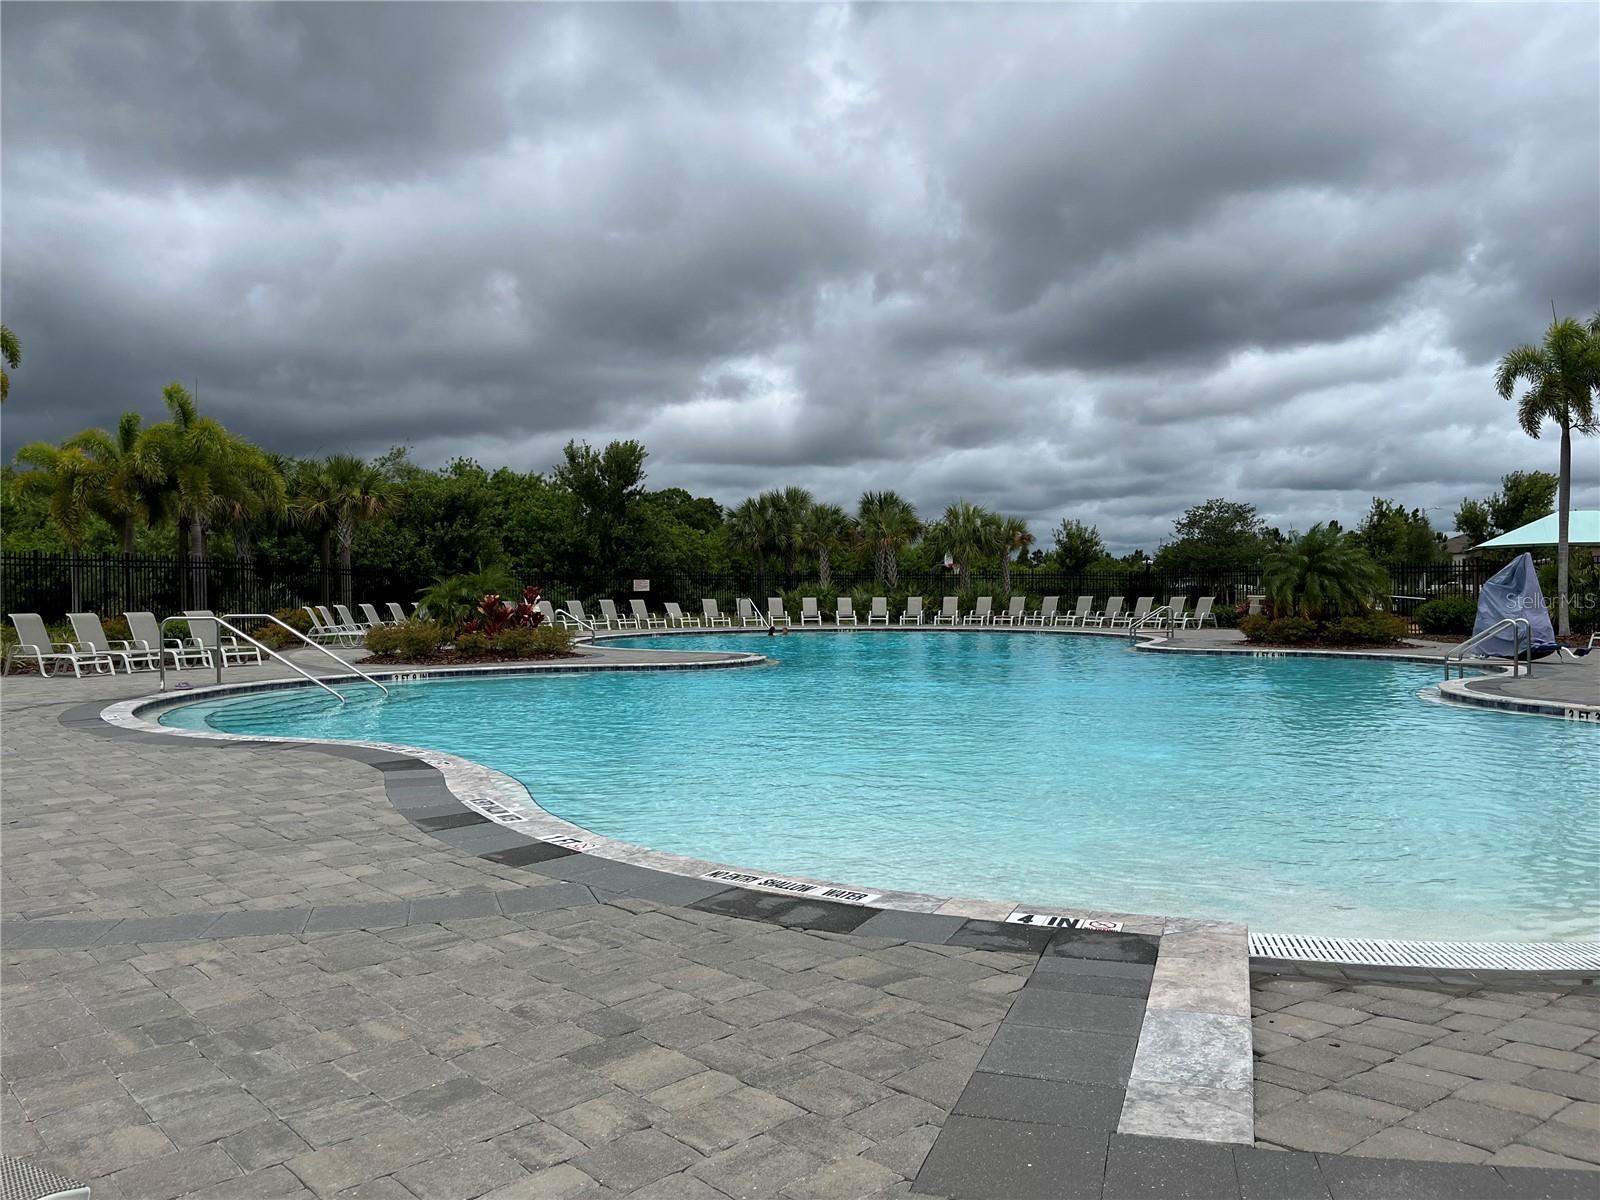 Overcast this day but a gorgeous pool, and HUGE